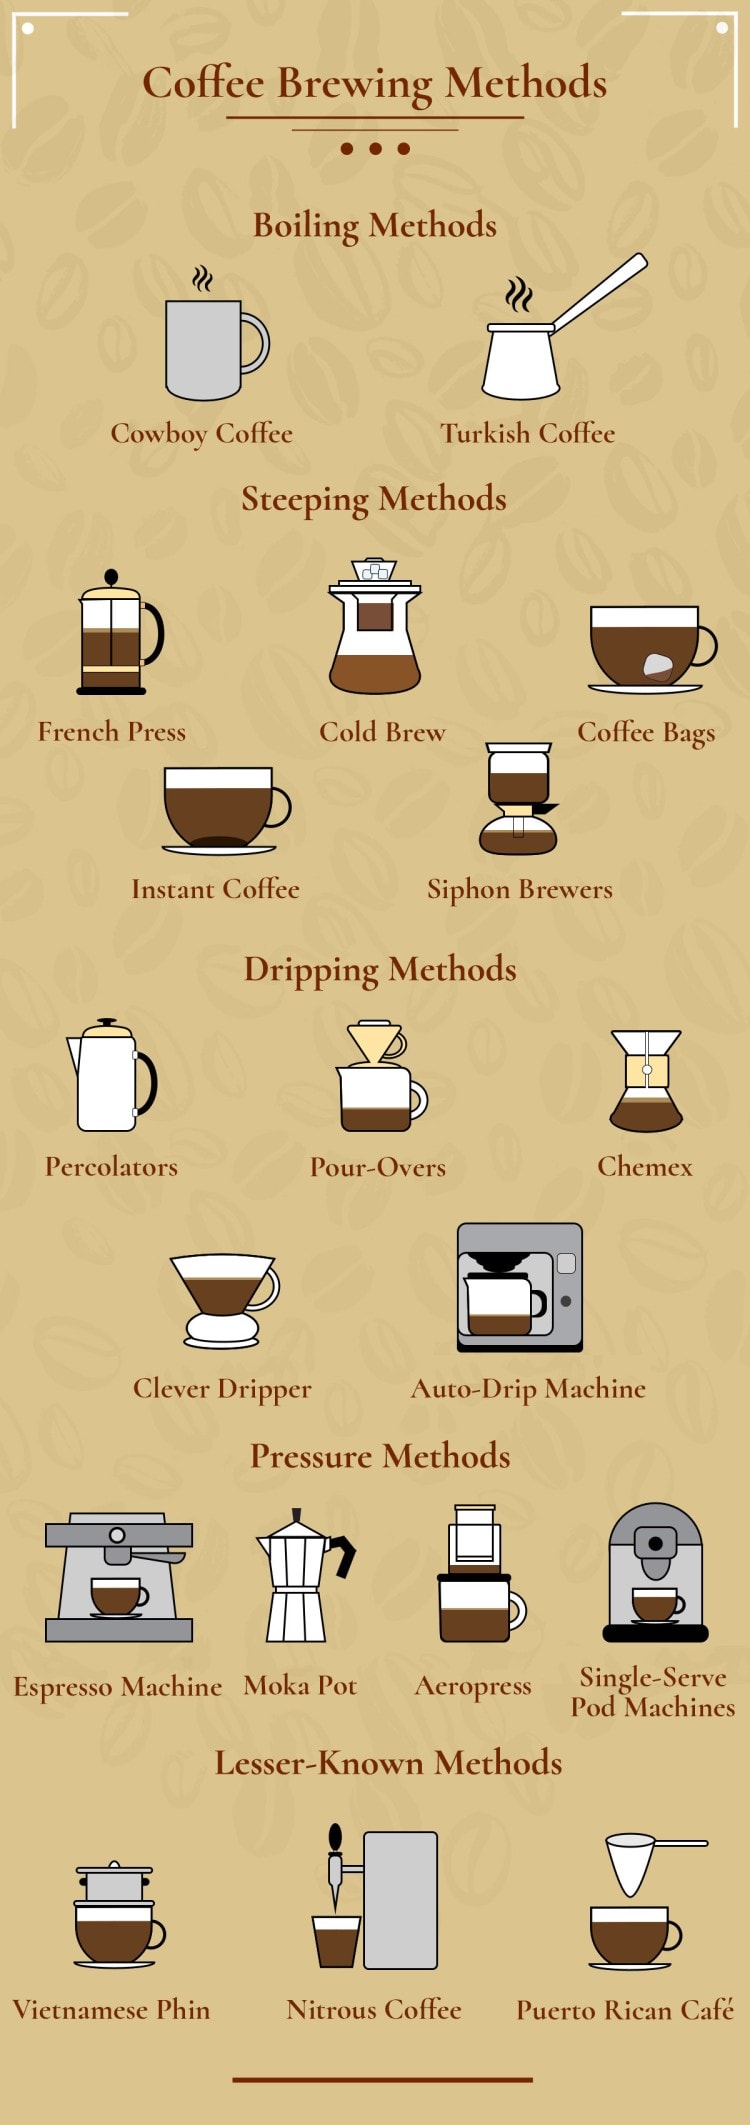 Different Coffee Brewing Methods